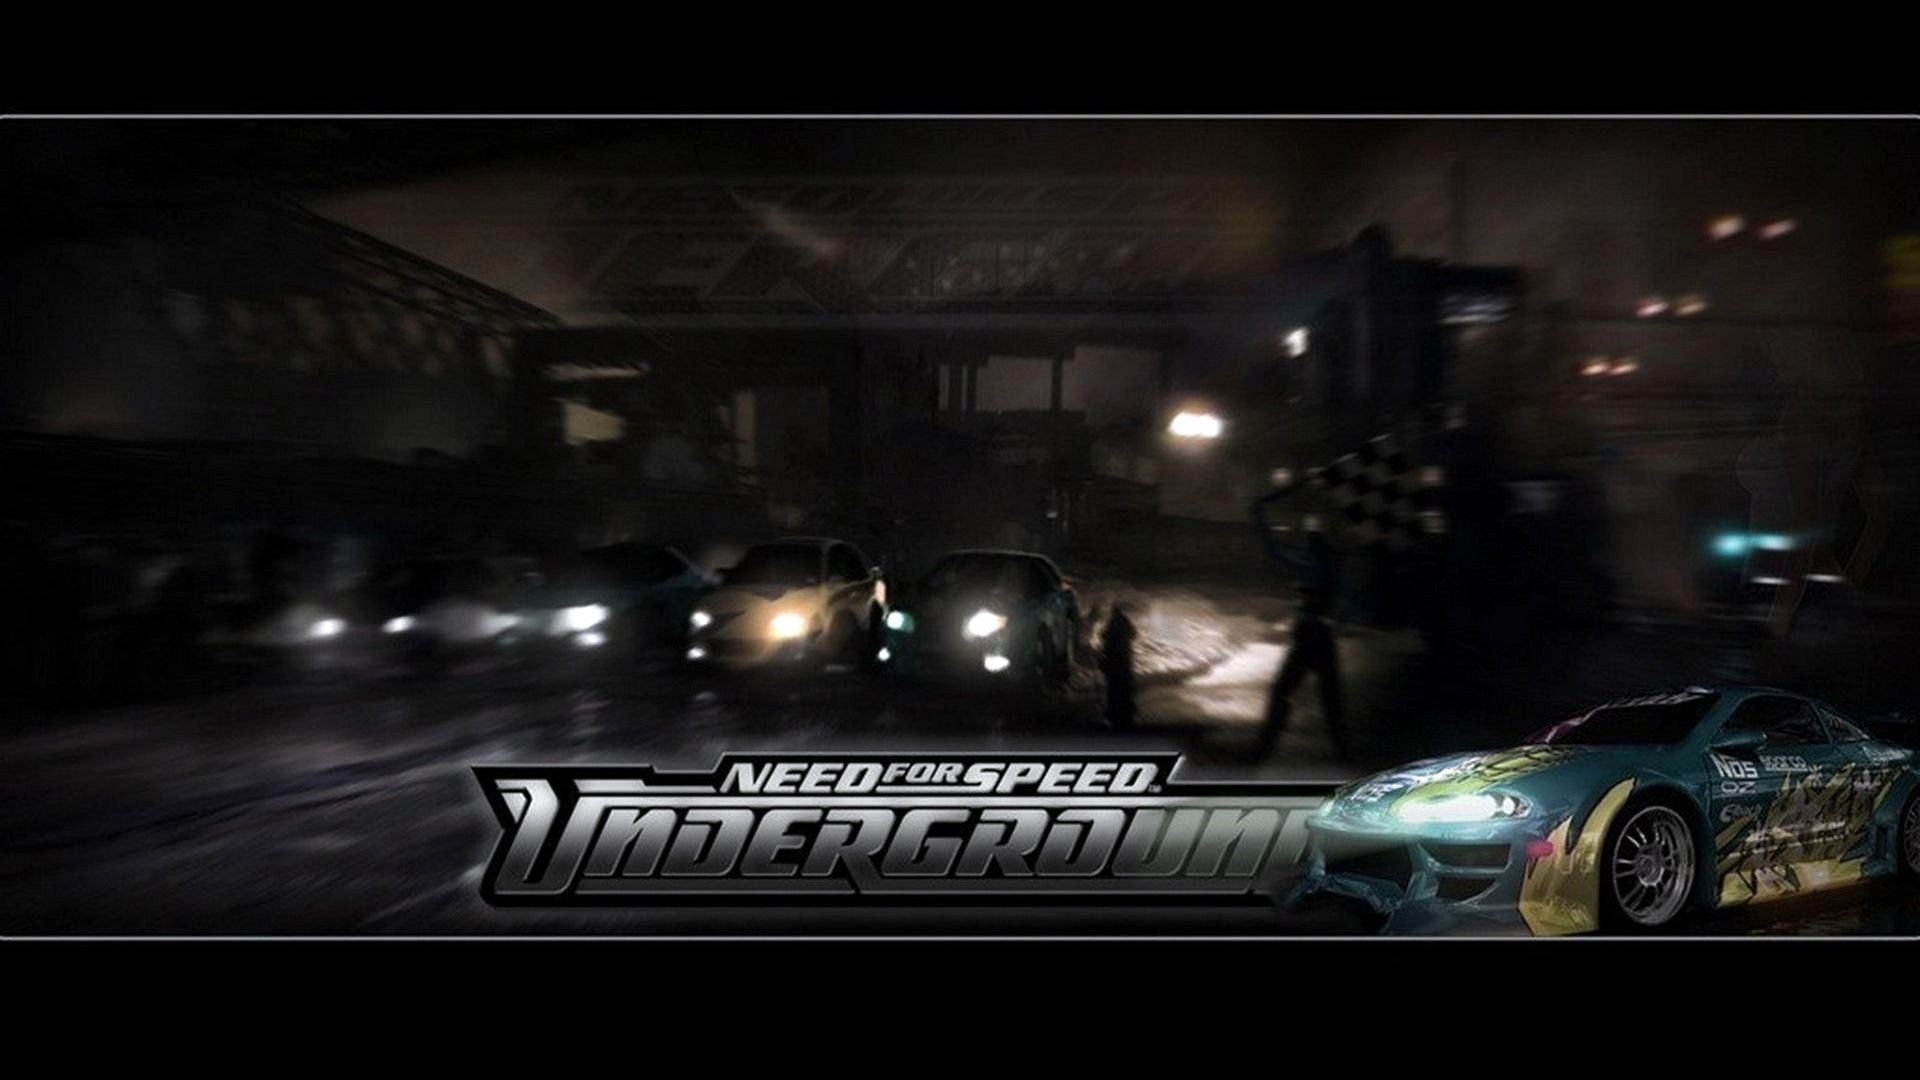 Need For Speed: Underground Wallpaper HD / Desktop and Mobile Background